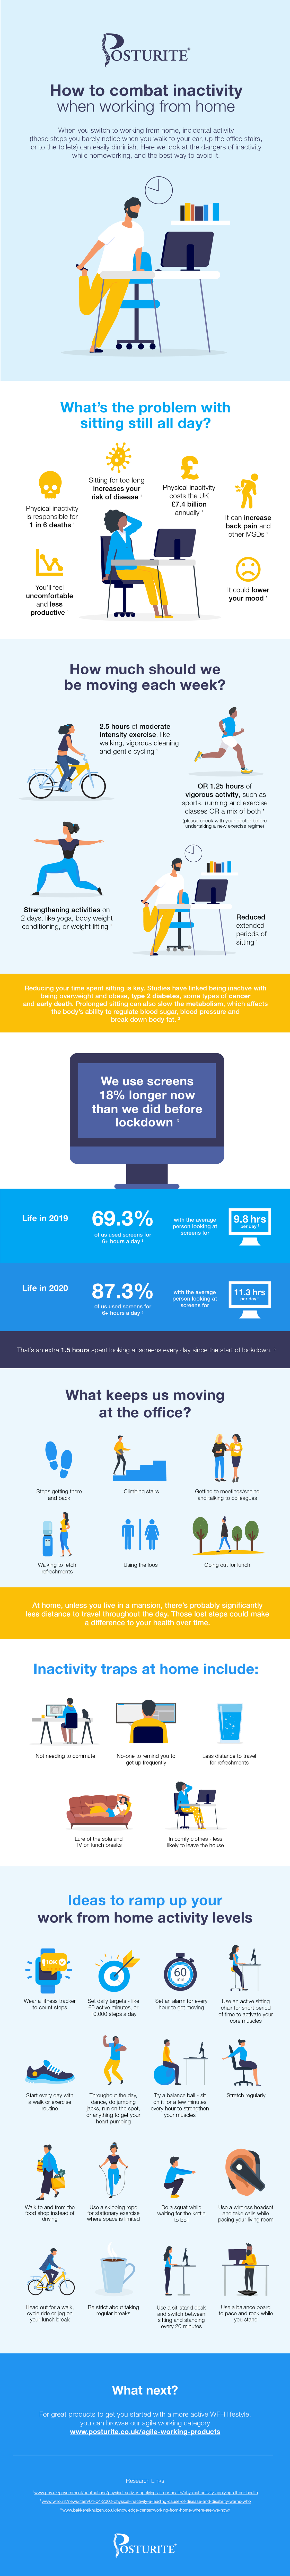 Infographic showing ways to be more active when you're working from home